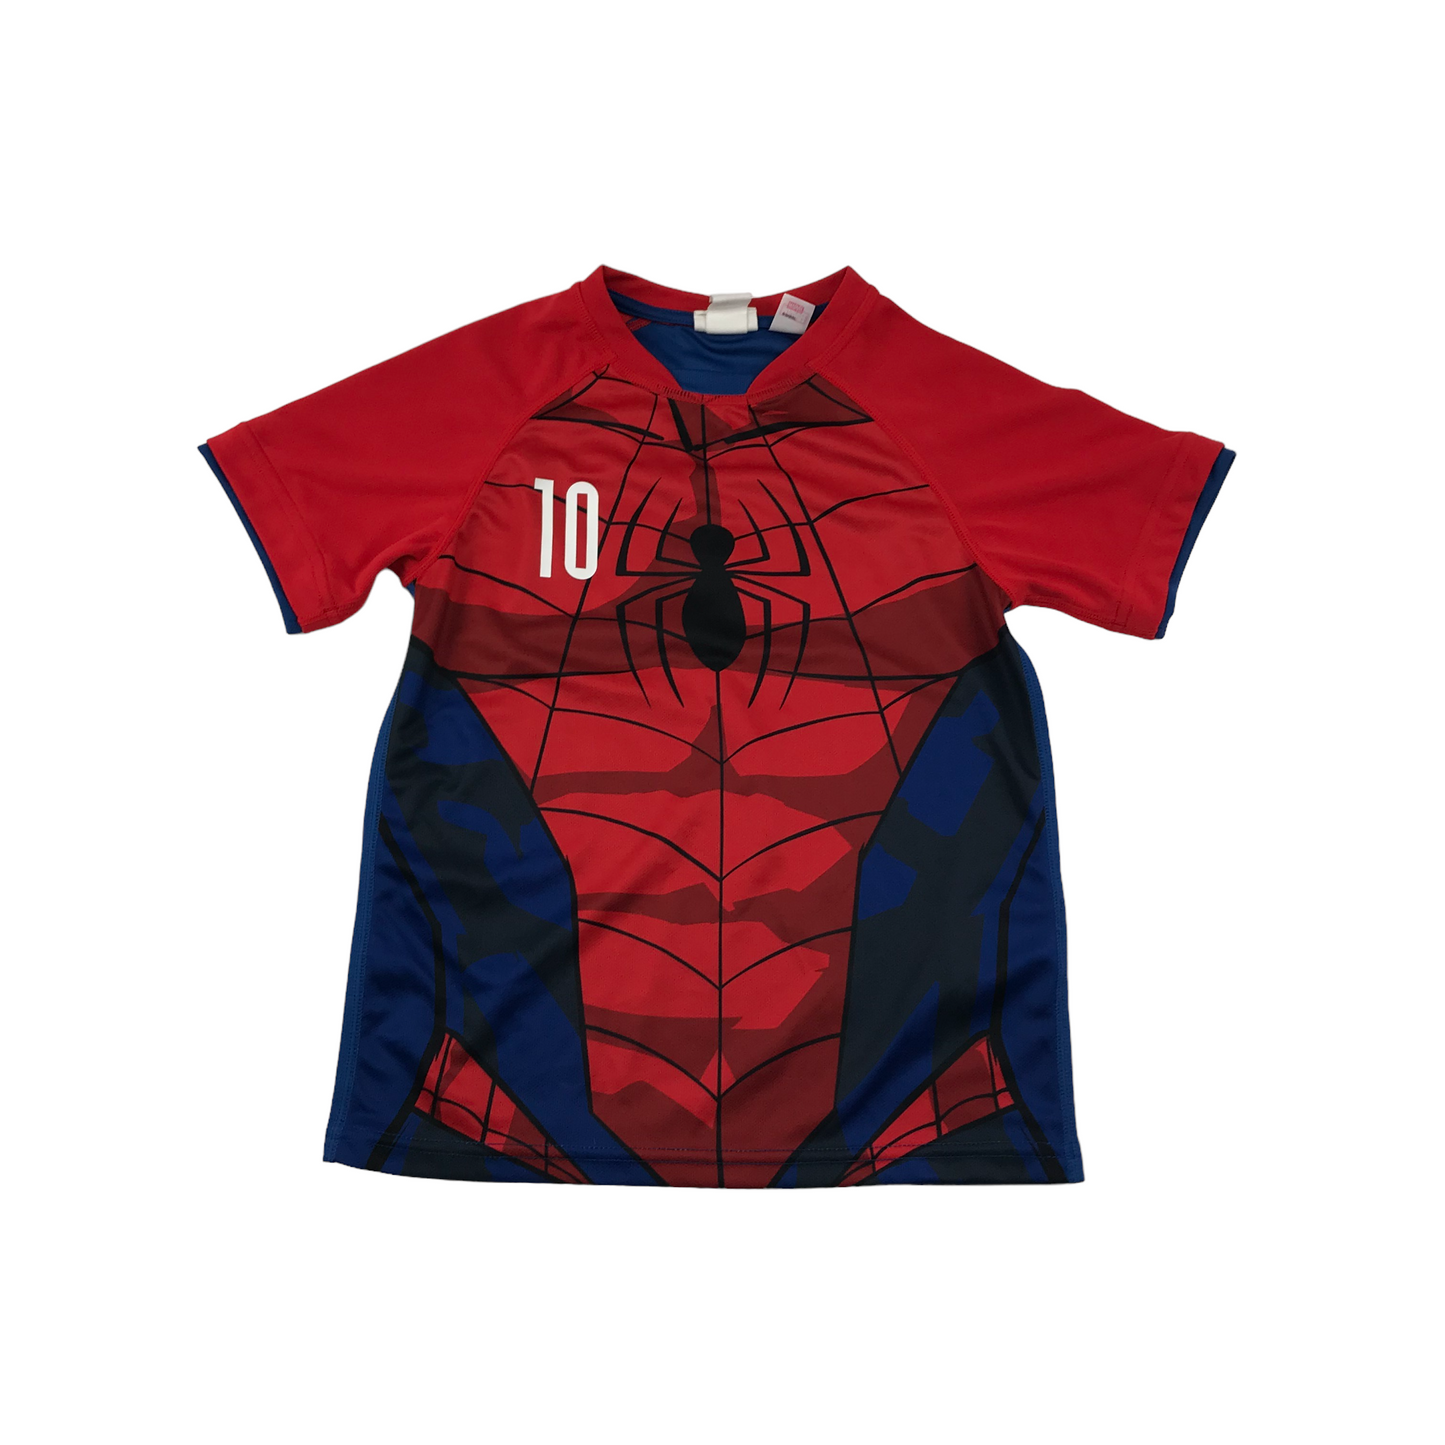 H&M Red and Blue Spiderman Sport Top and Shorts Set Age 6-8